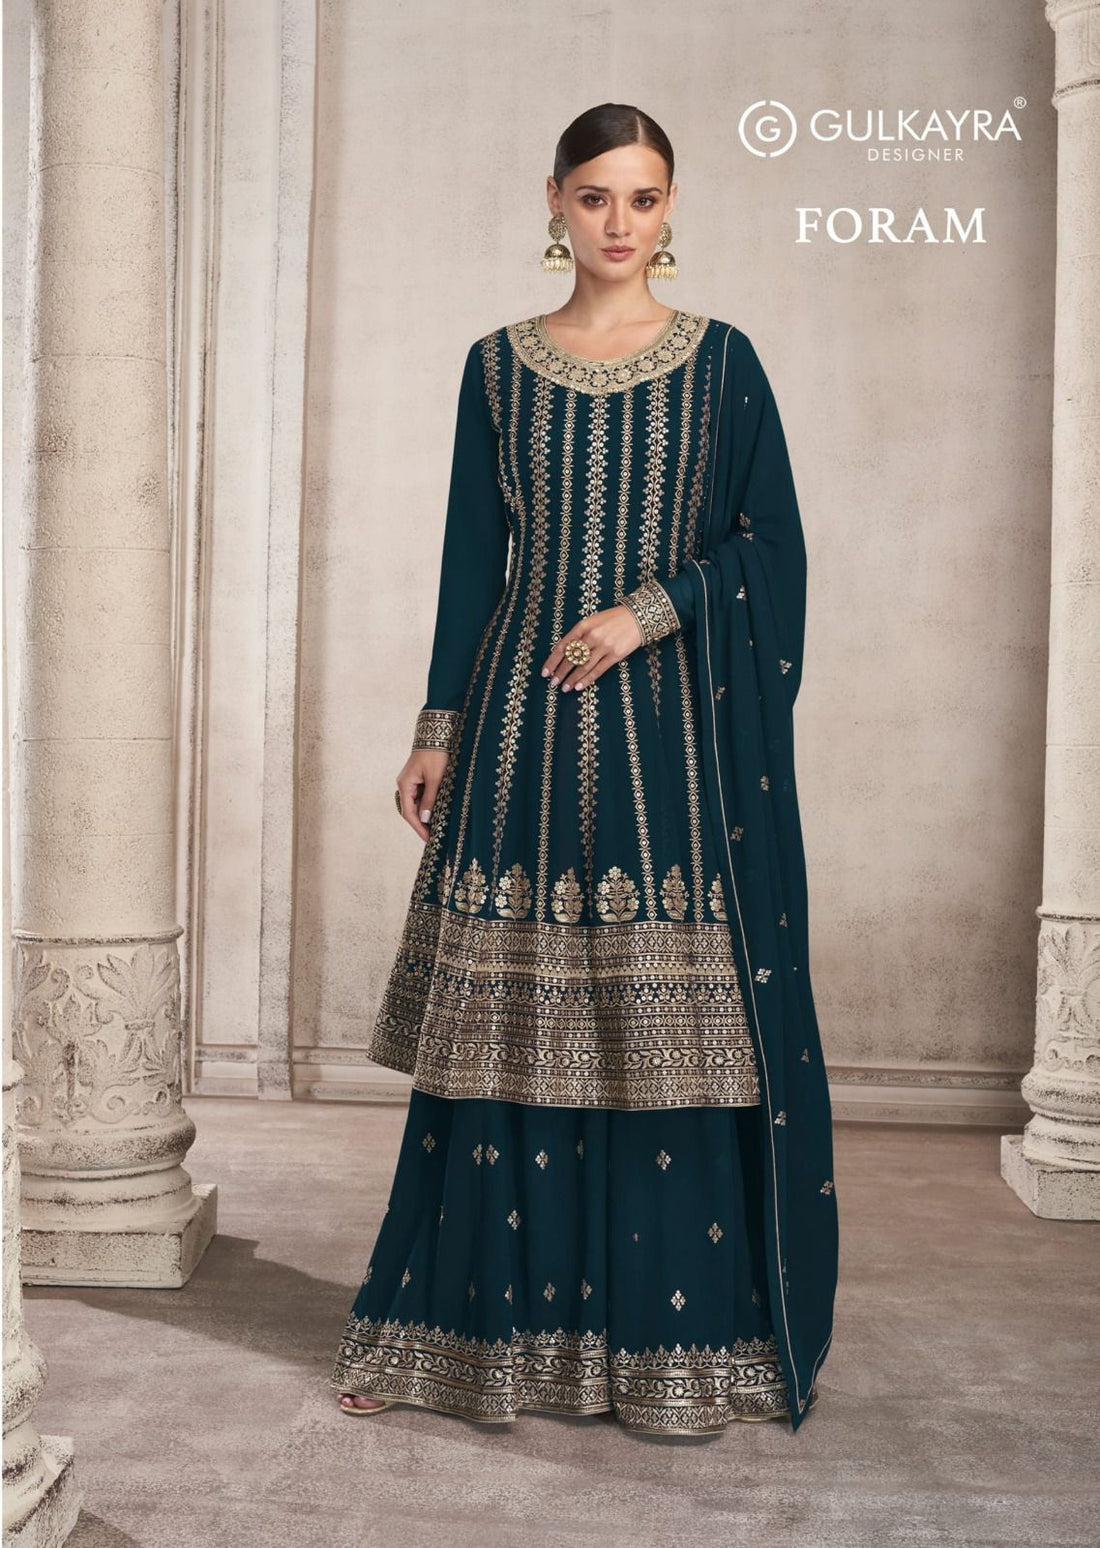 GULKAYRA DESIGNER FORAM 7146 COLOUR SERIES SUIT Anant Tex Exports Private Limited